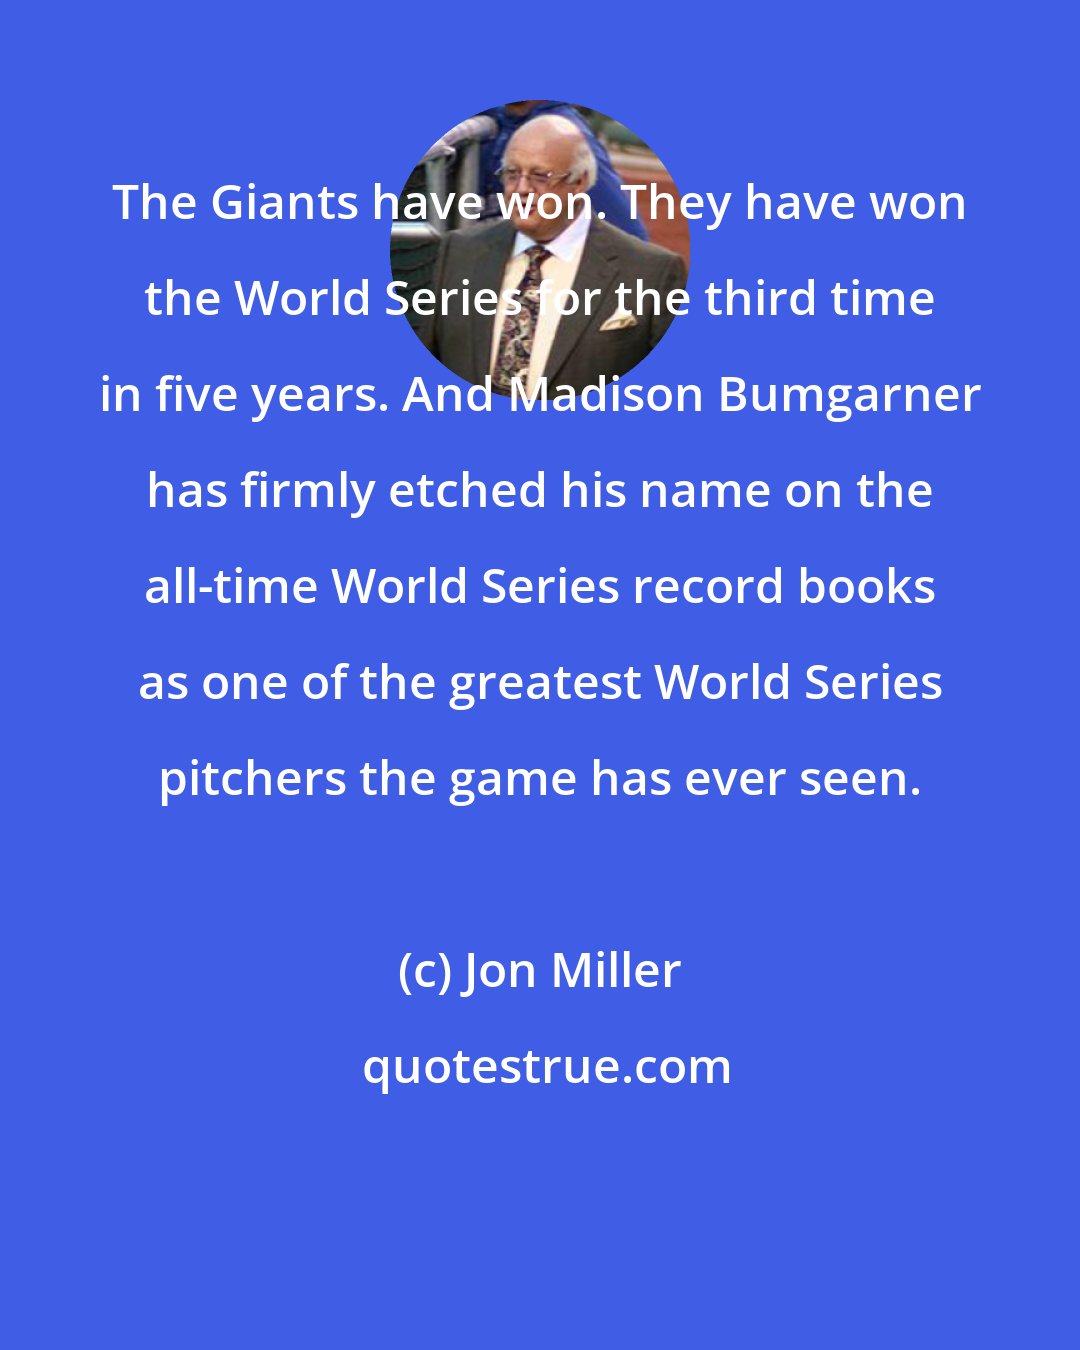 Jon Miller: The Giants have won. They have won the World Series for the third time in five years. And Madison Bumgarner has firmly etched his name on the all-time World Series record books as one of the greatest World Series pitchers the game has ever seen.